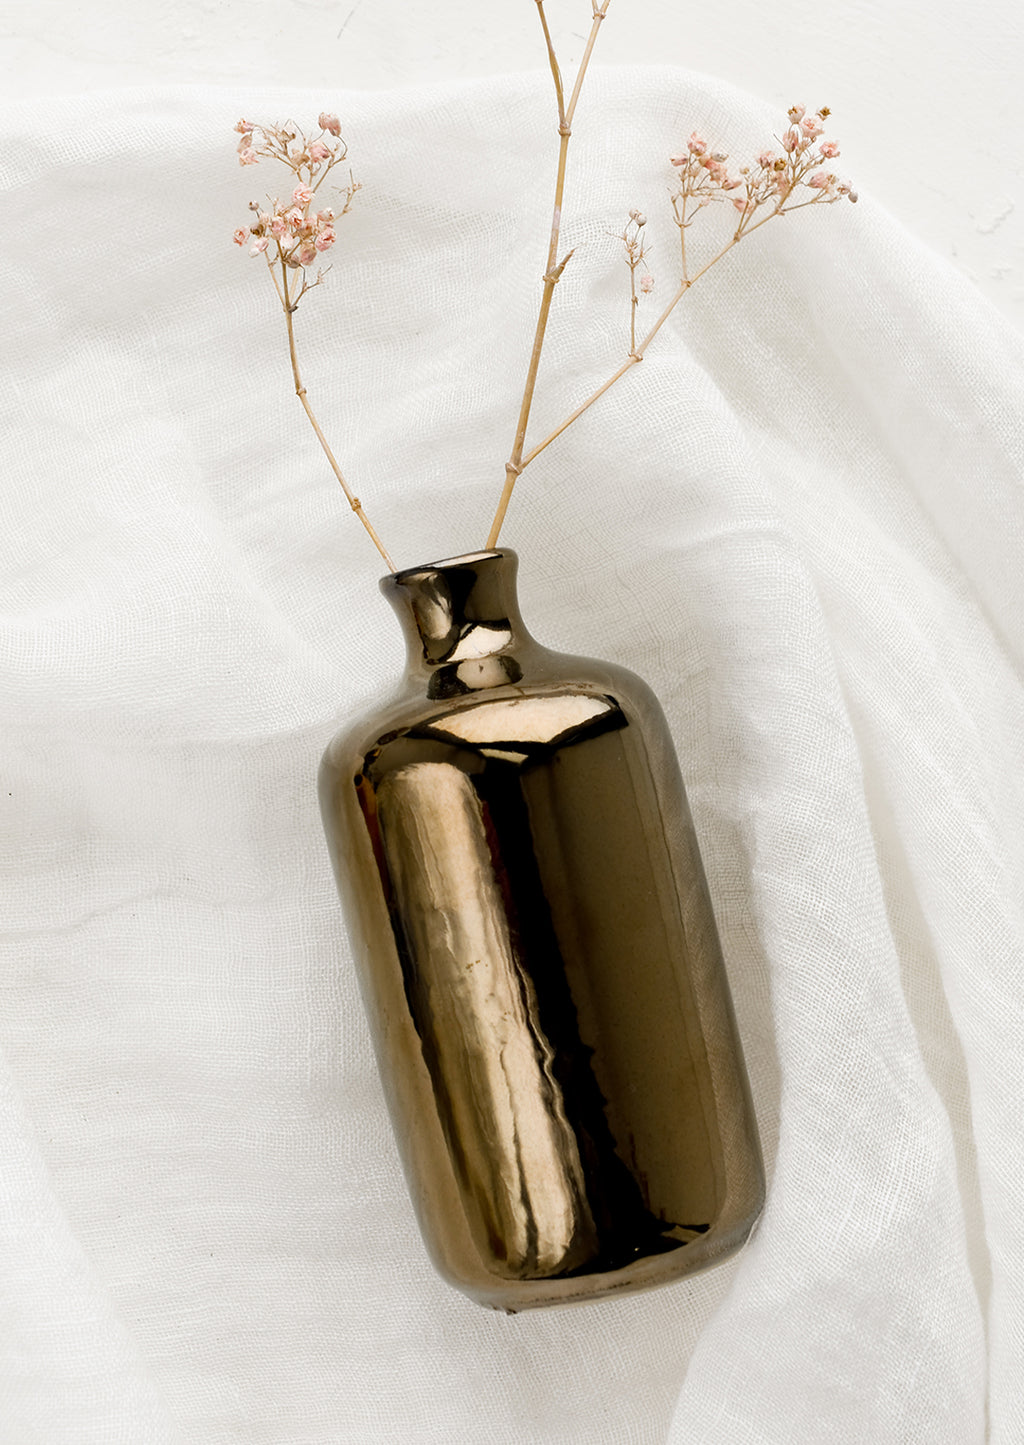 Tall / Bronze: A ceramic bud vase in tall shape, bronze color with dried flower.